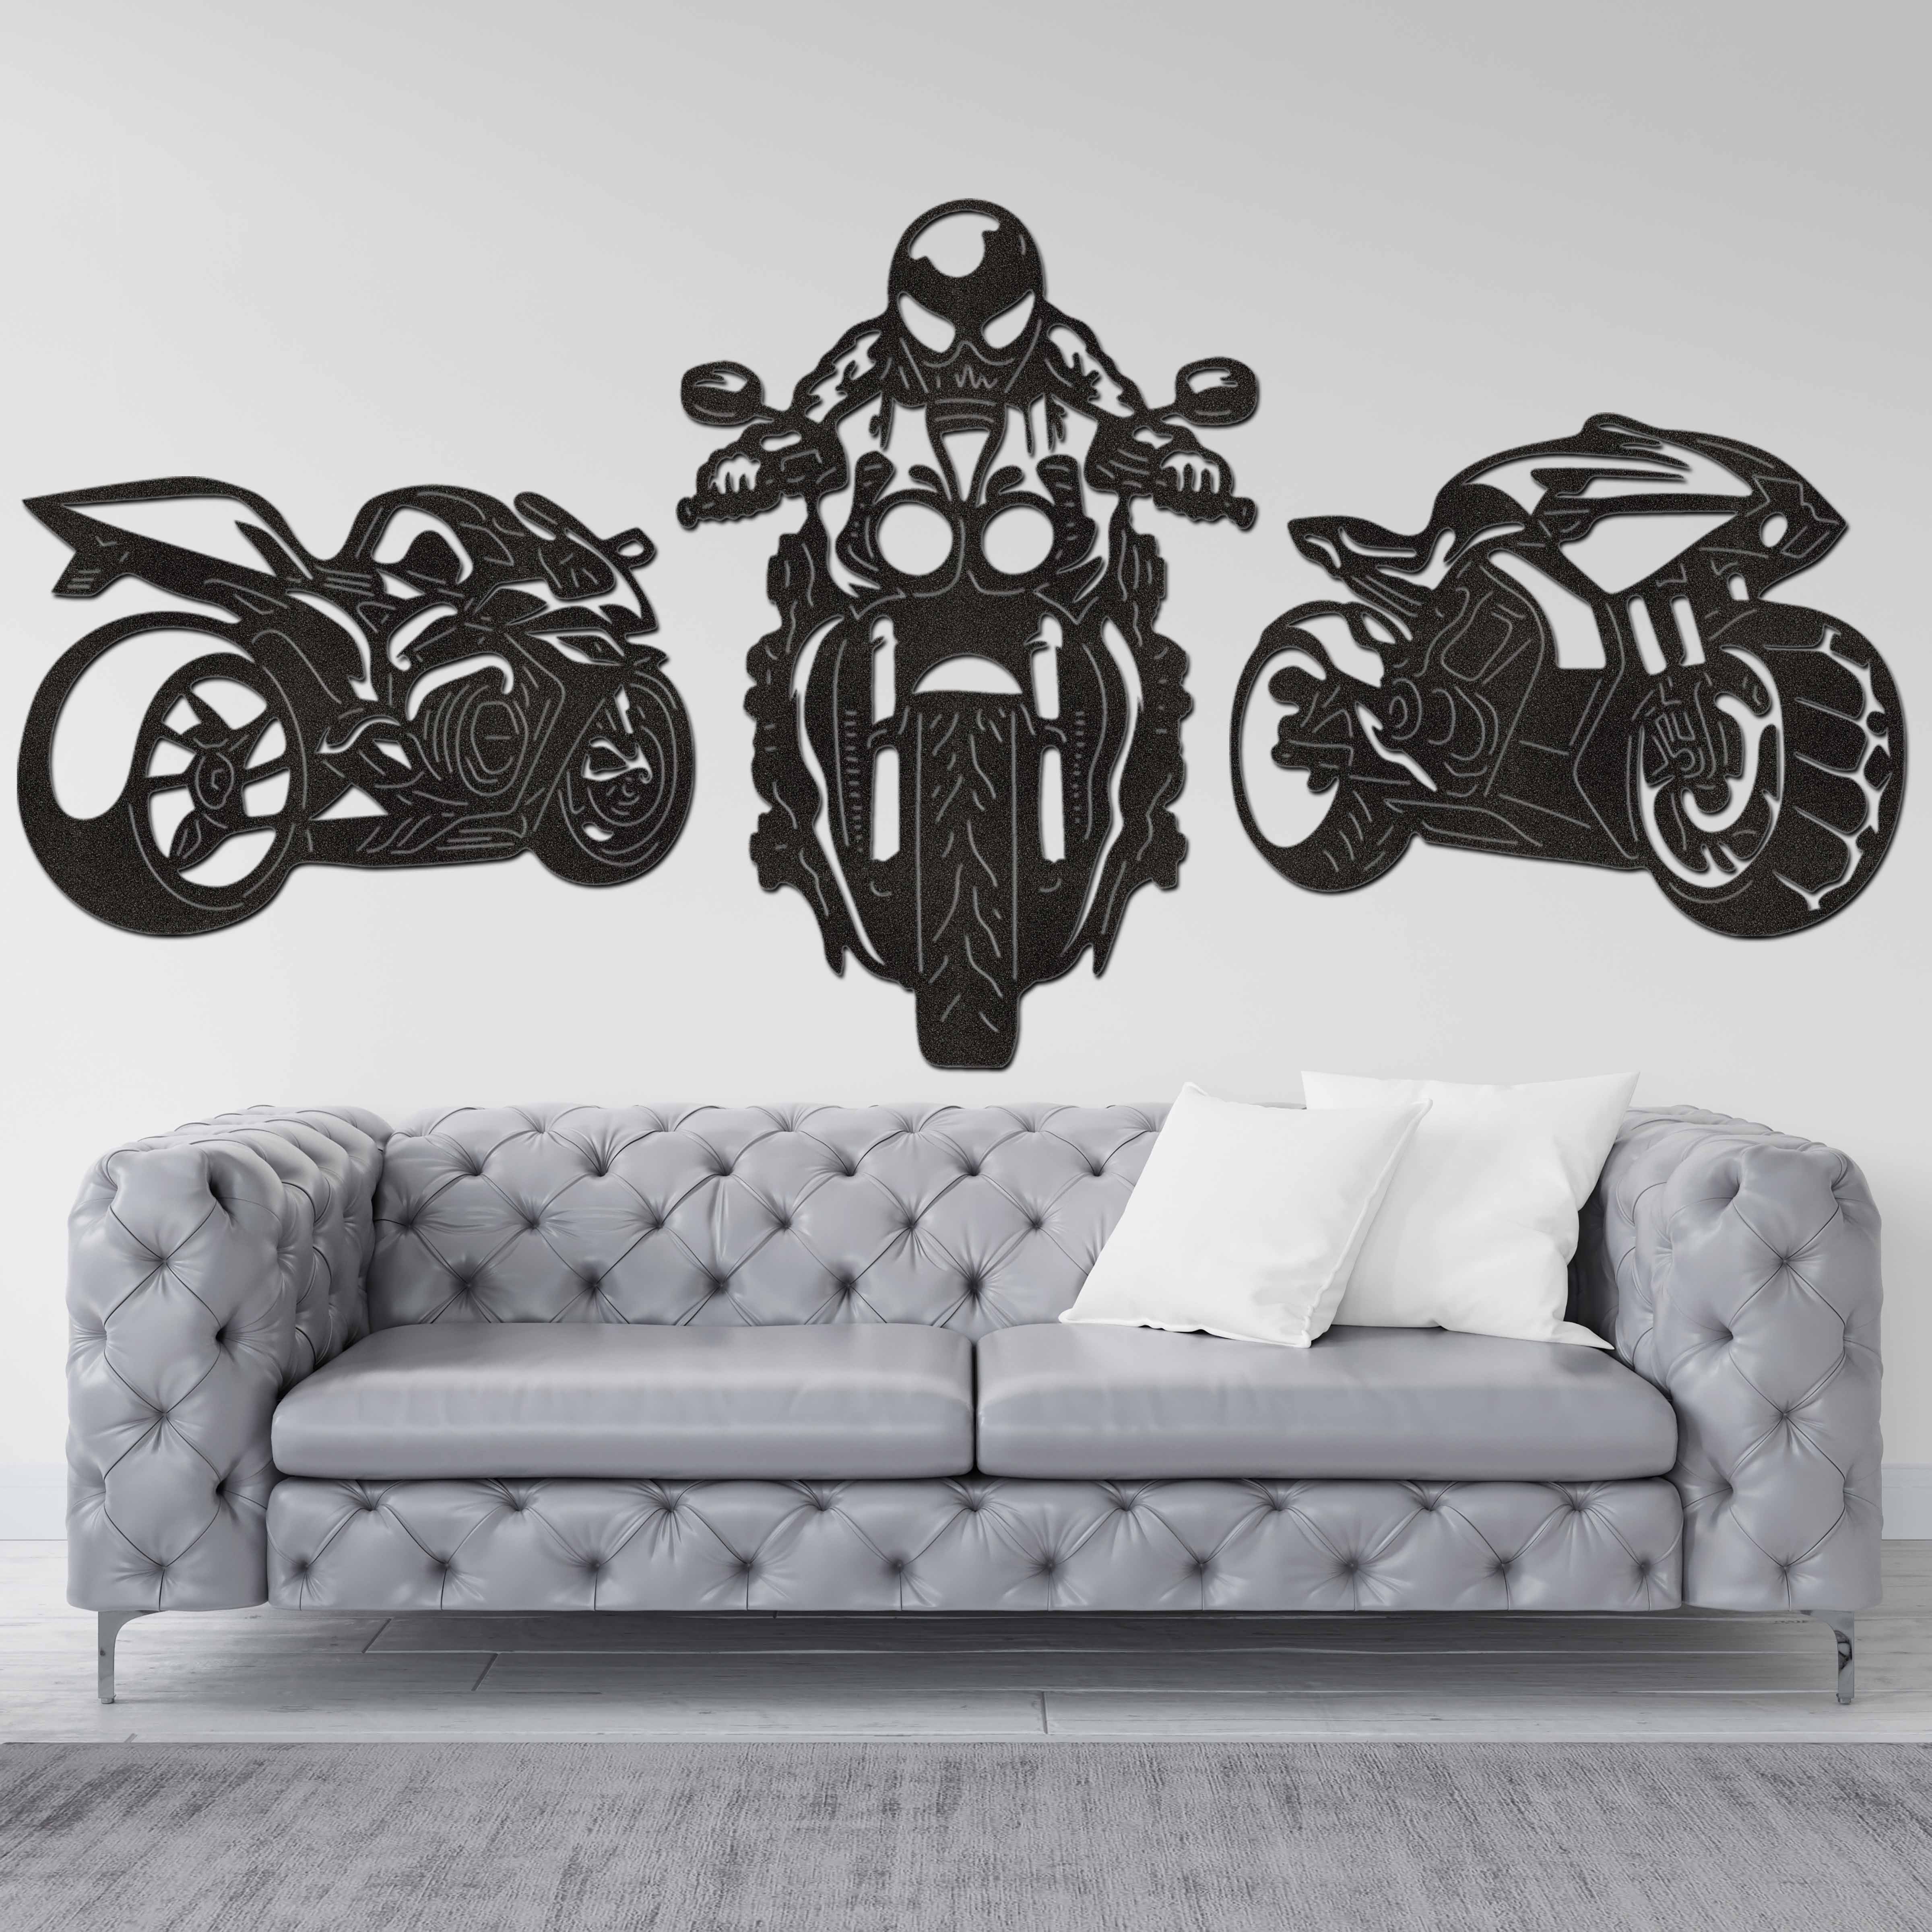 Motorcycles and Choppers DXF Files Cut Ready for CNC Machines-DXFforCNC.com